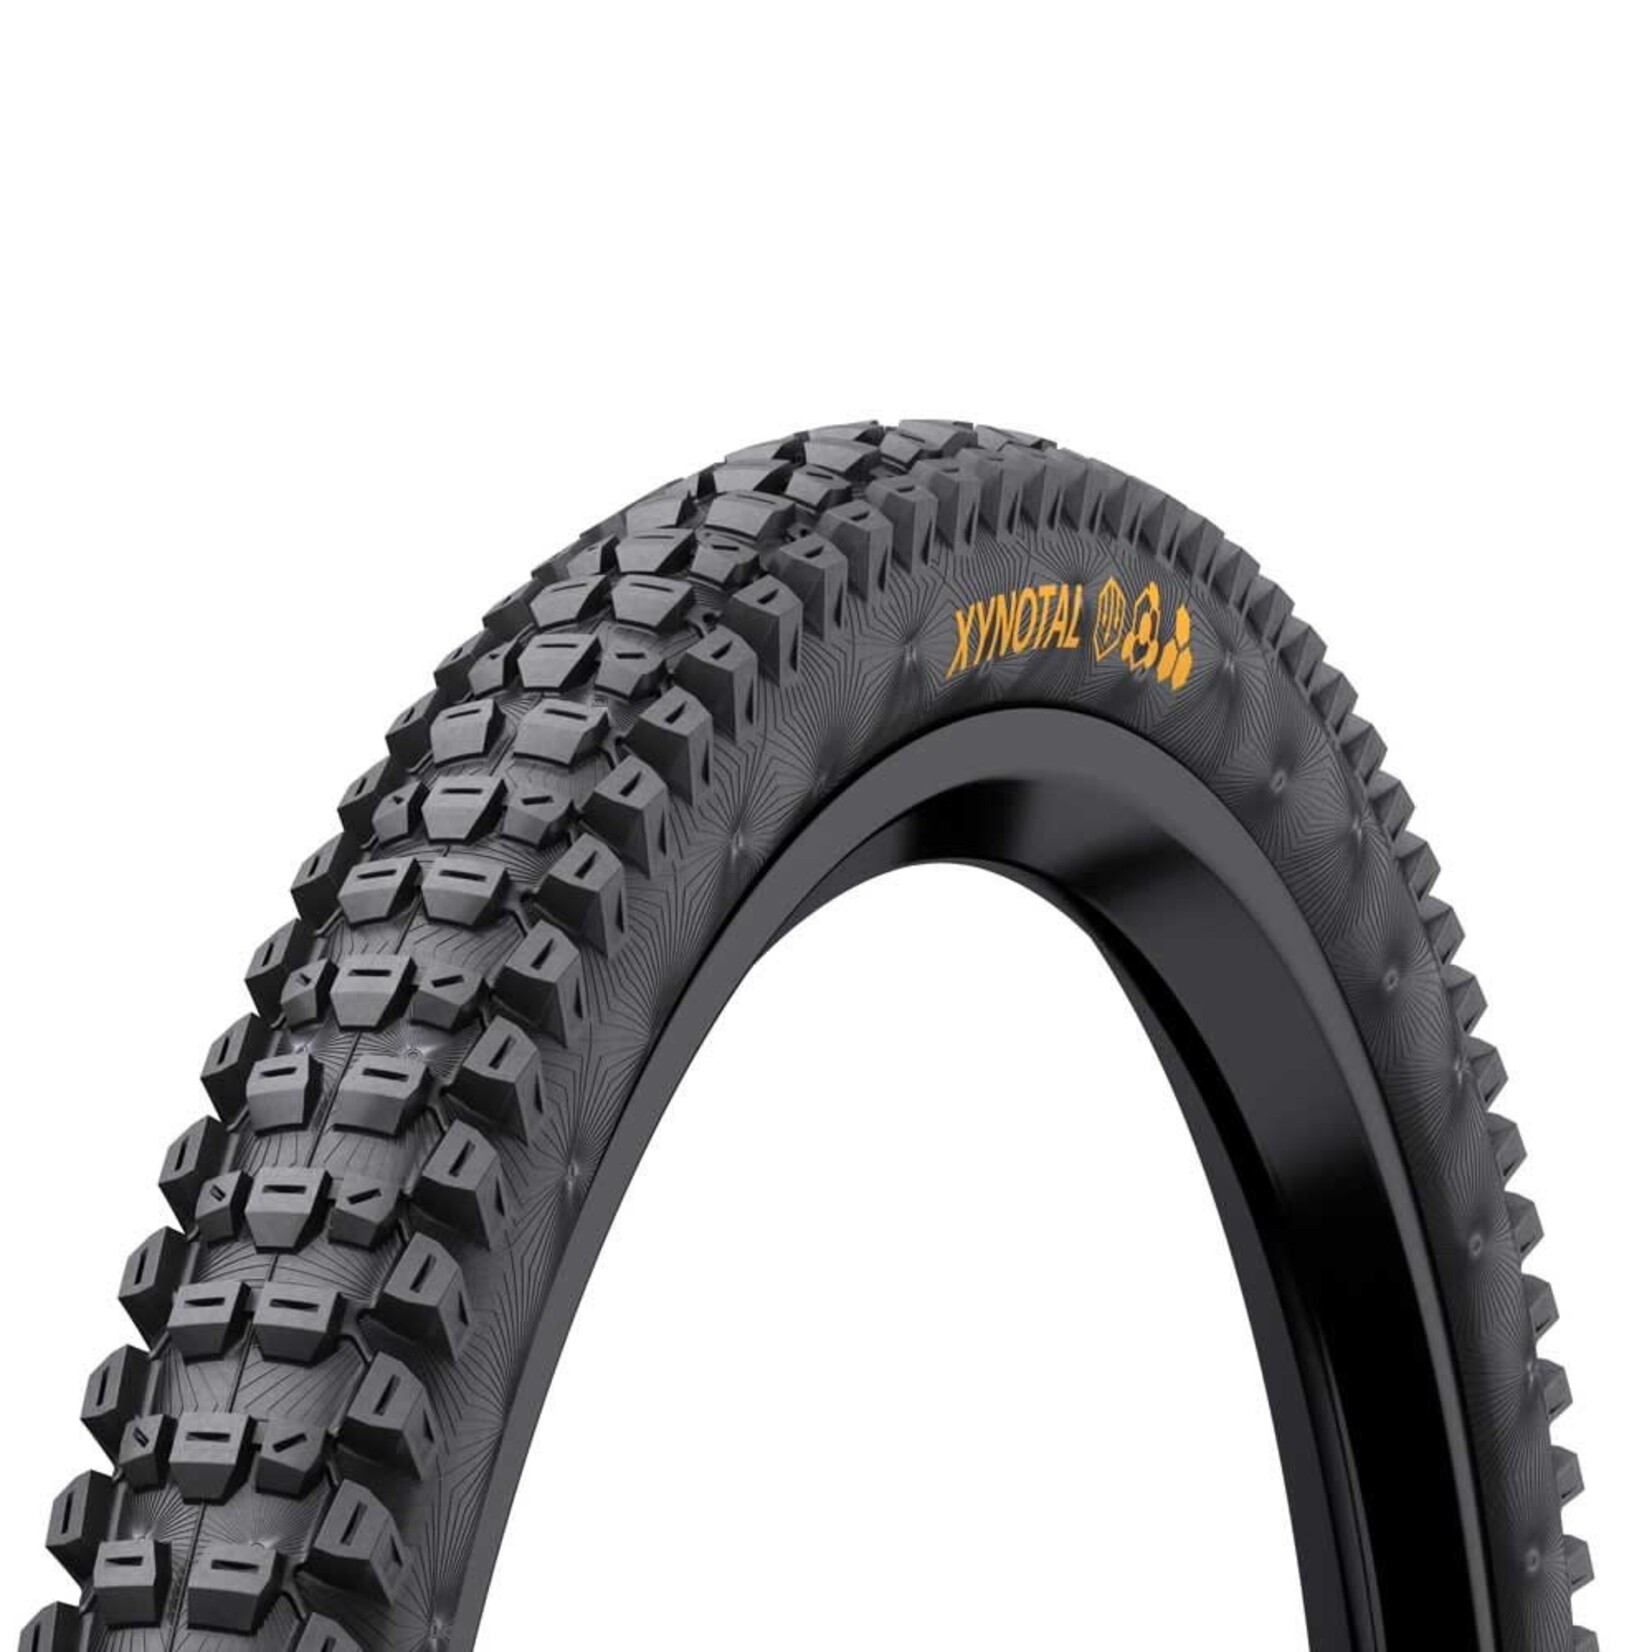 Continental continental XYNOTAL 27.5X2.4 ENDURO CASING SOFT FOLDABLE BLK